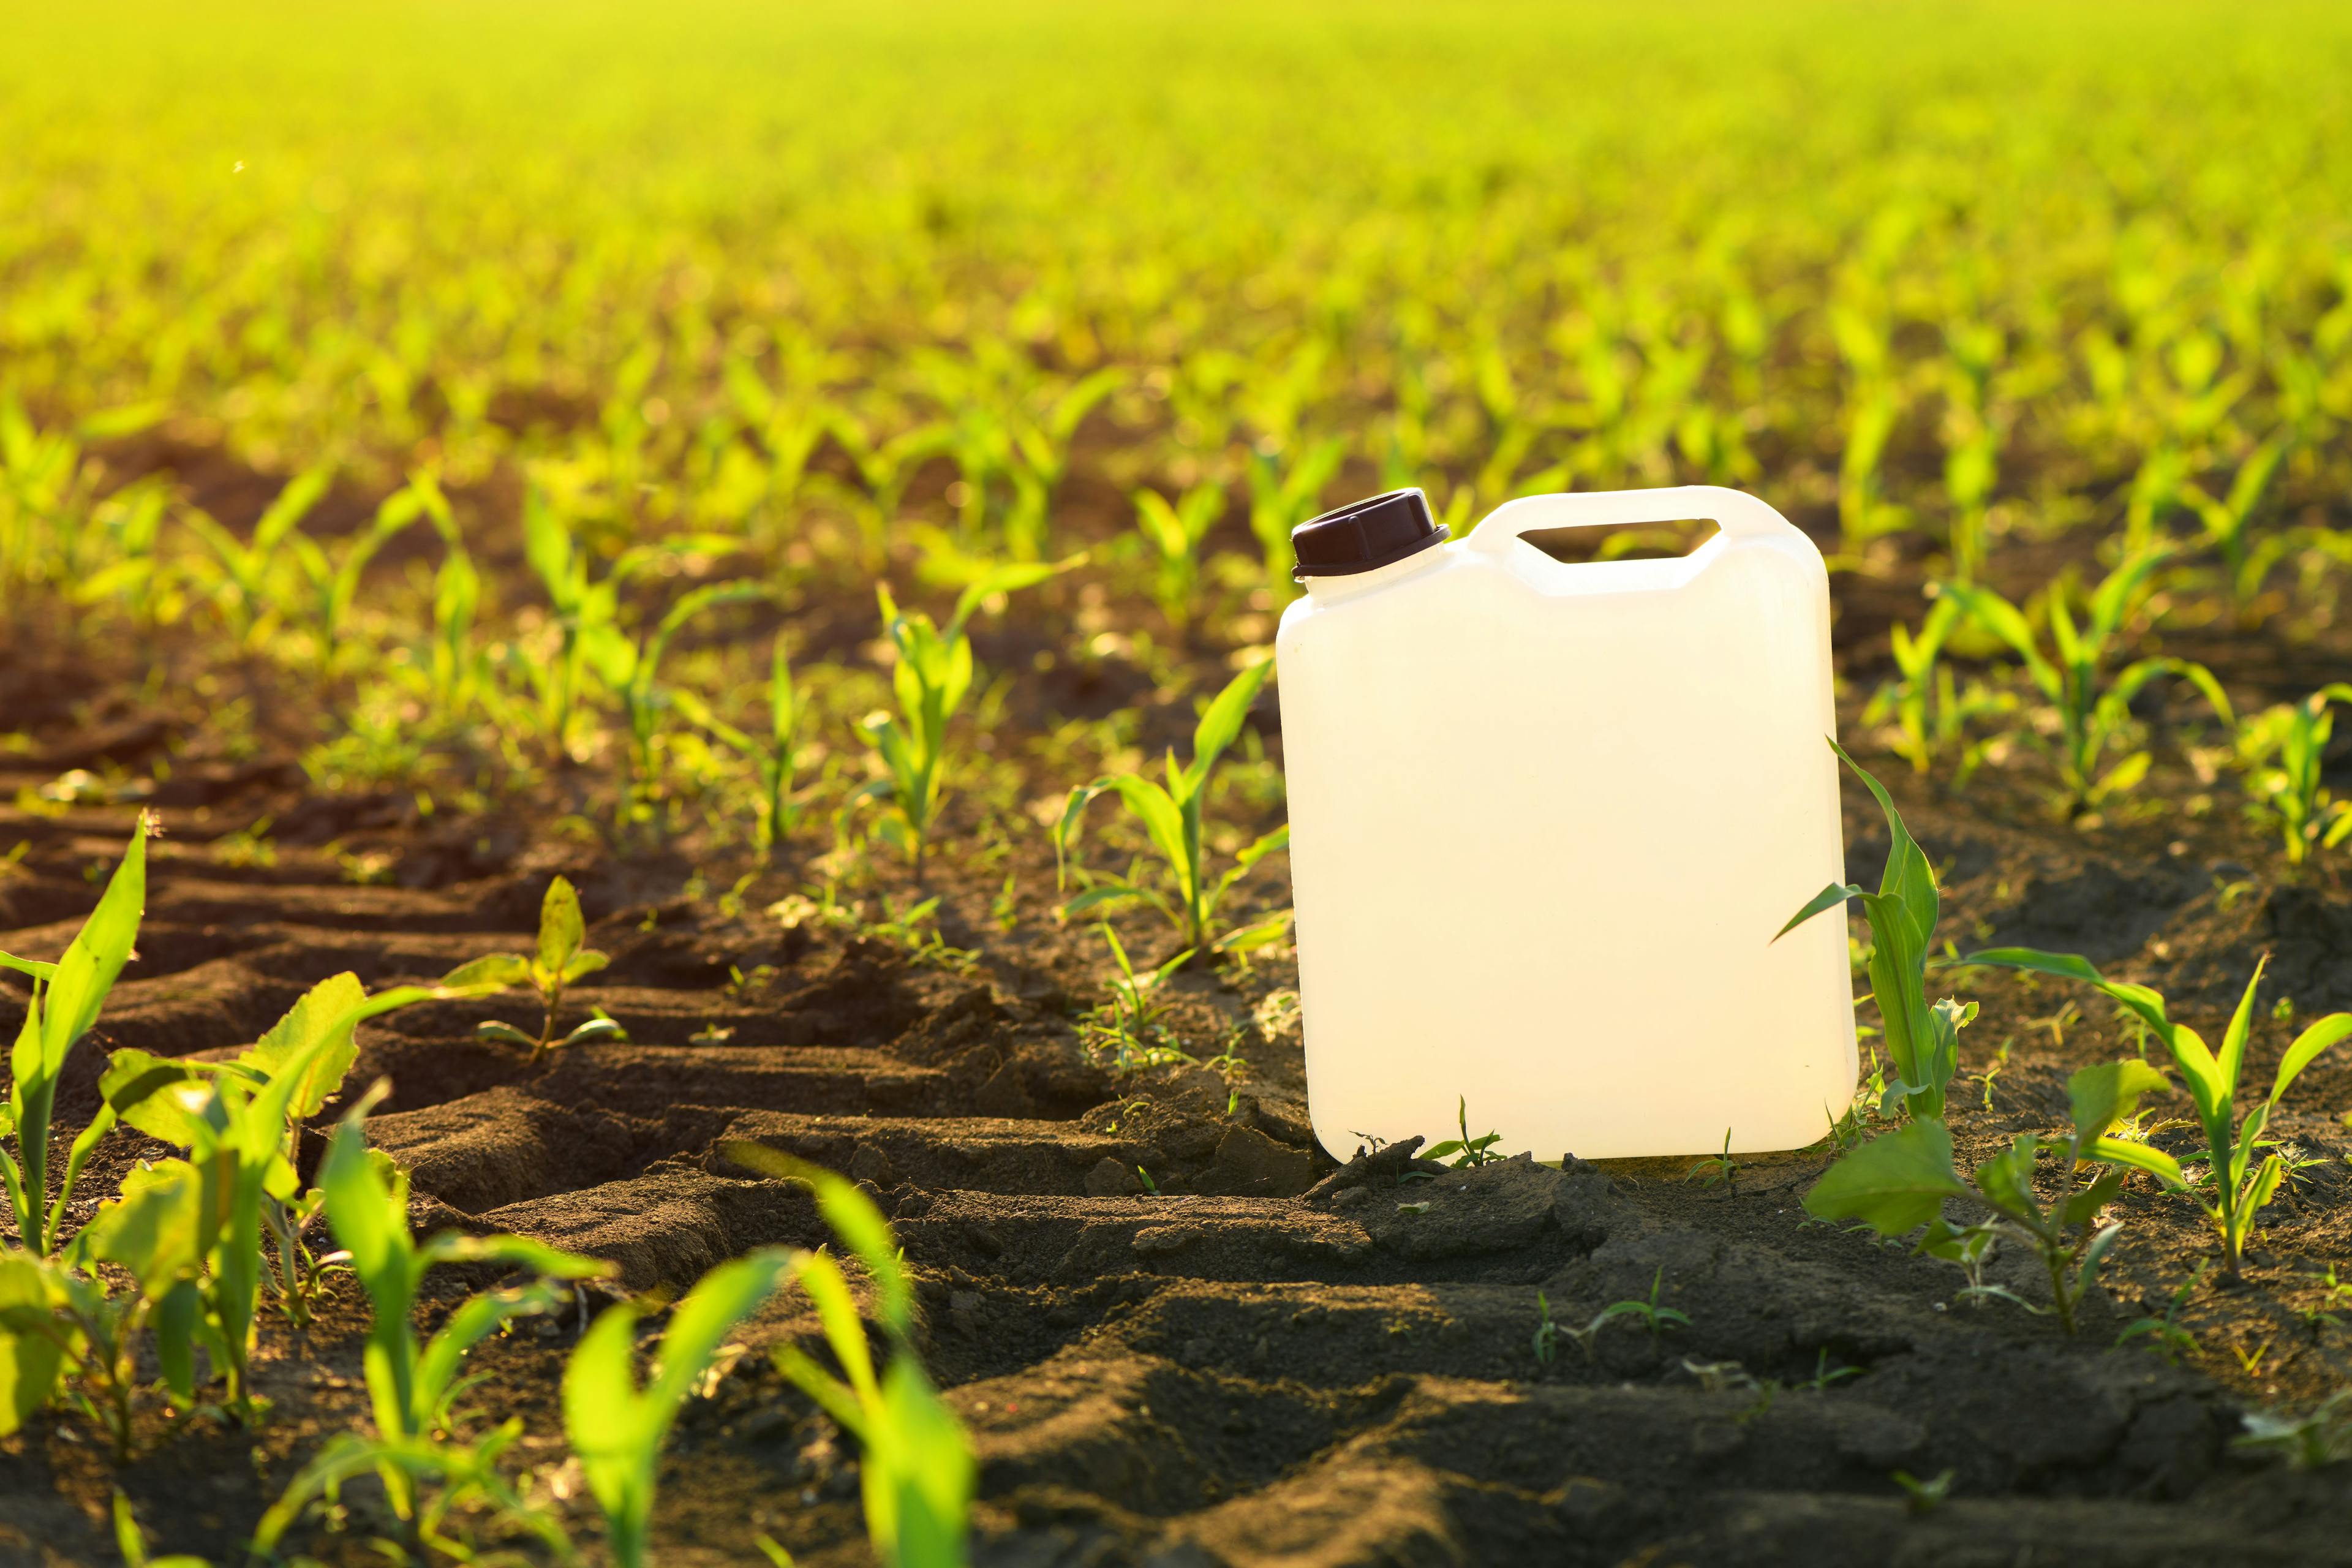 Blank white herbicide canister can in corn seedling field in springtime sunset | Image Credit: © Bits and Splits - stock.adobe.com